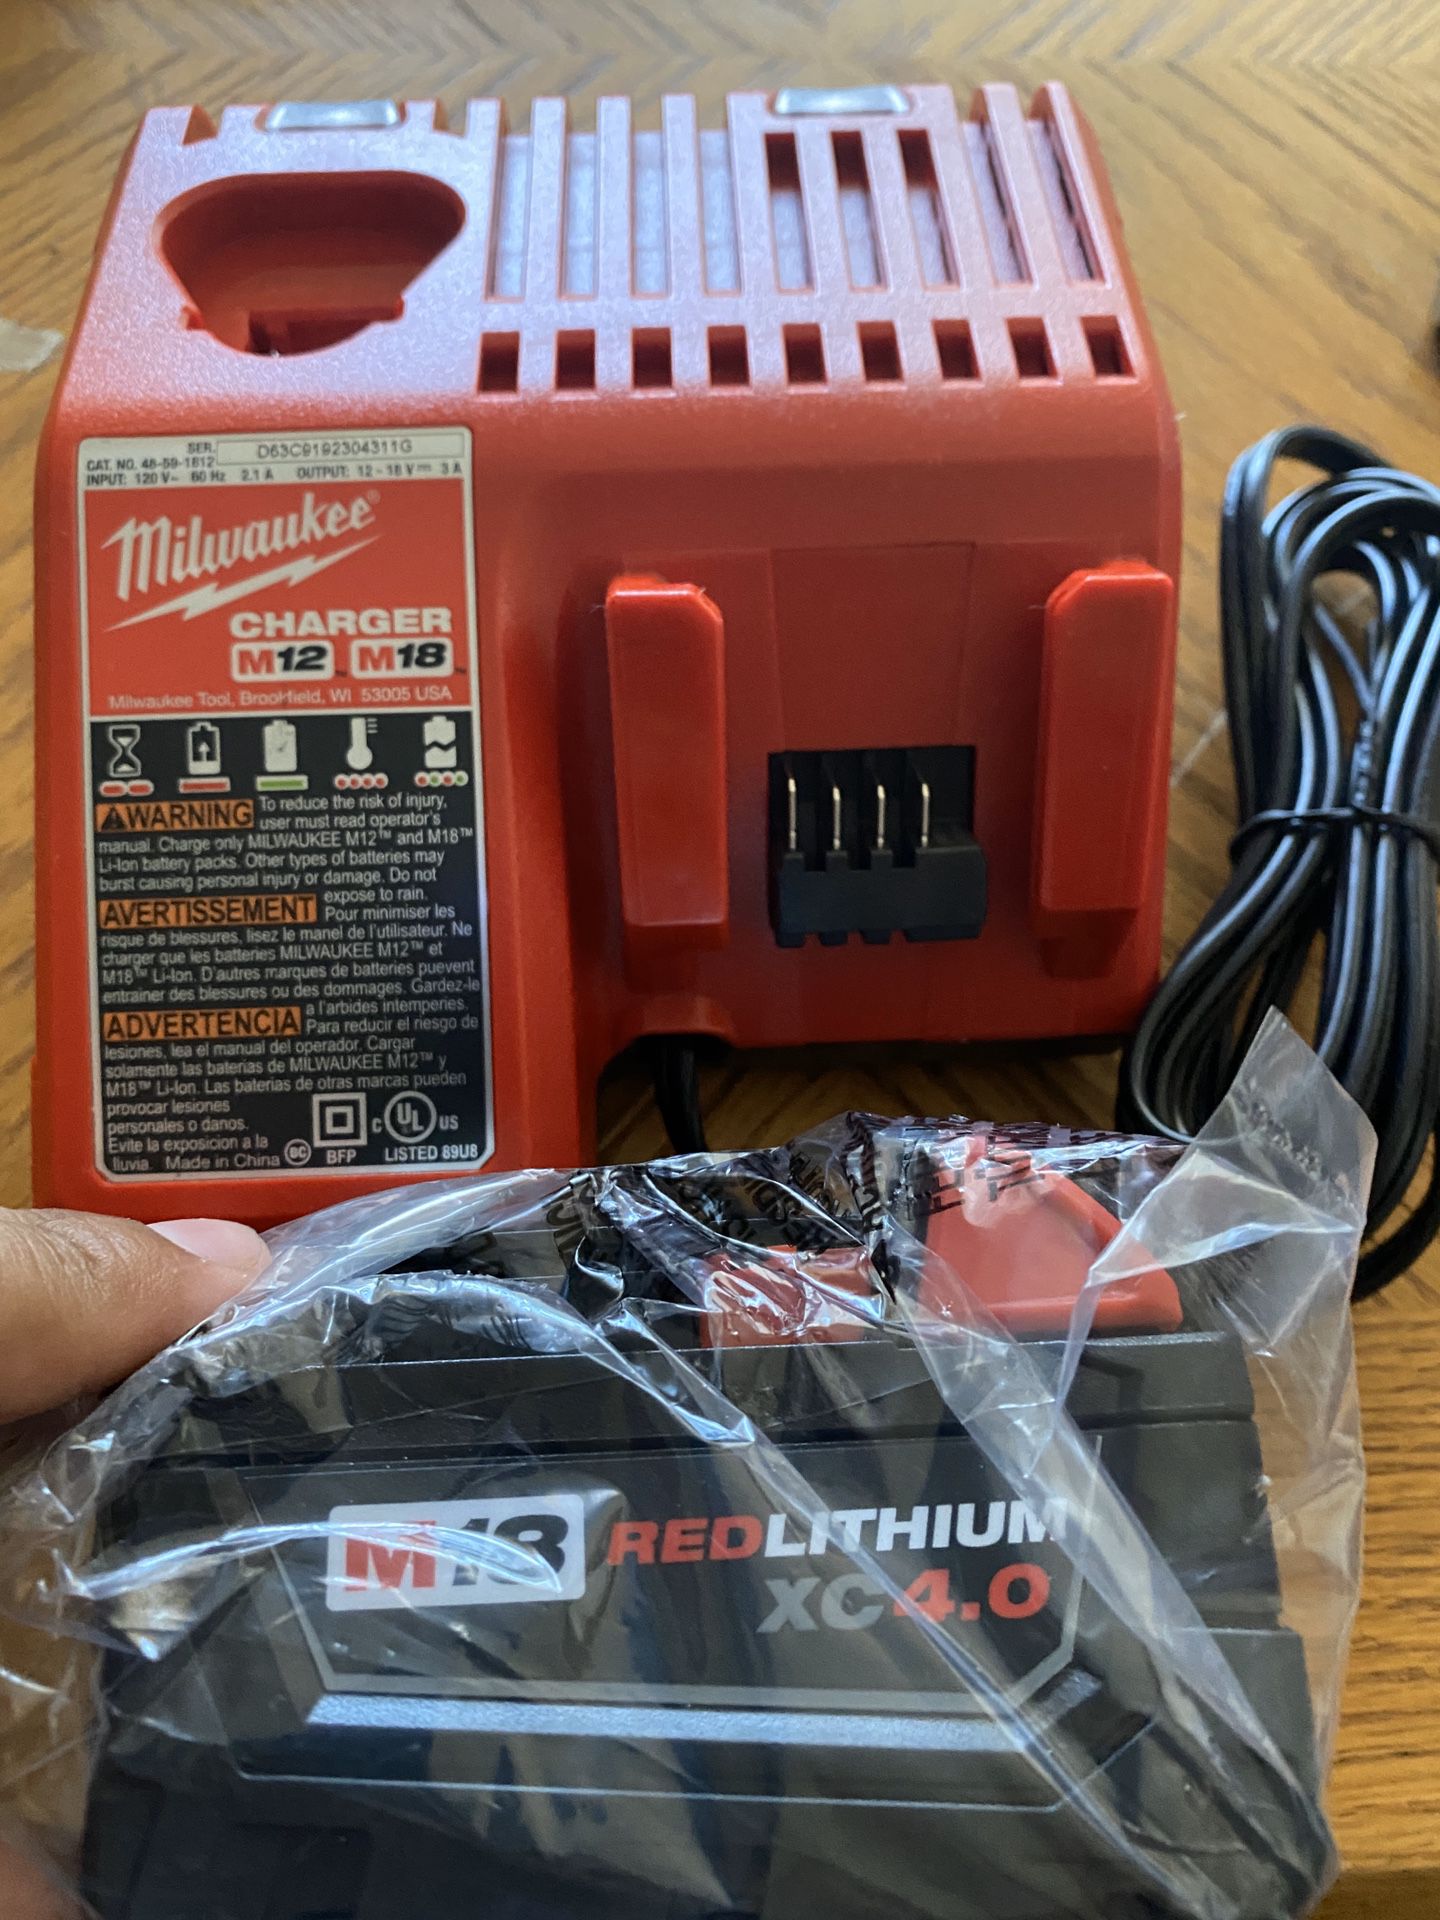 Milwaukee M12/M18 Charger & (1) xc4.0ah Battery Kit New